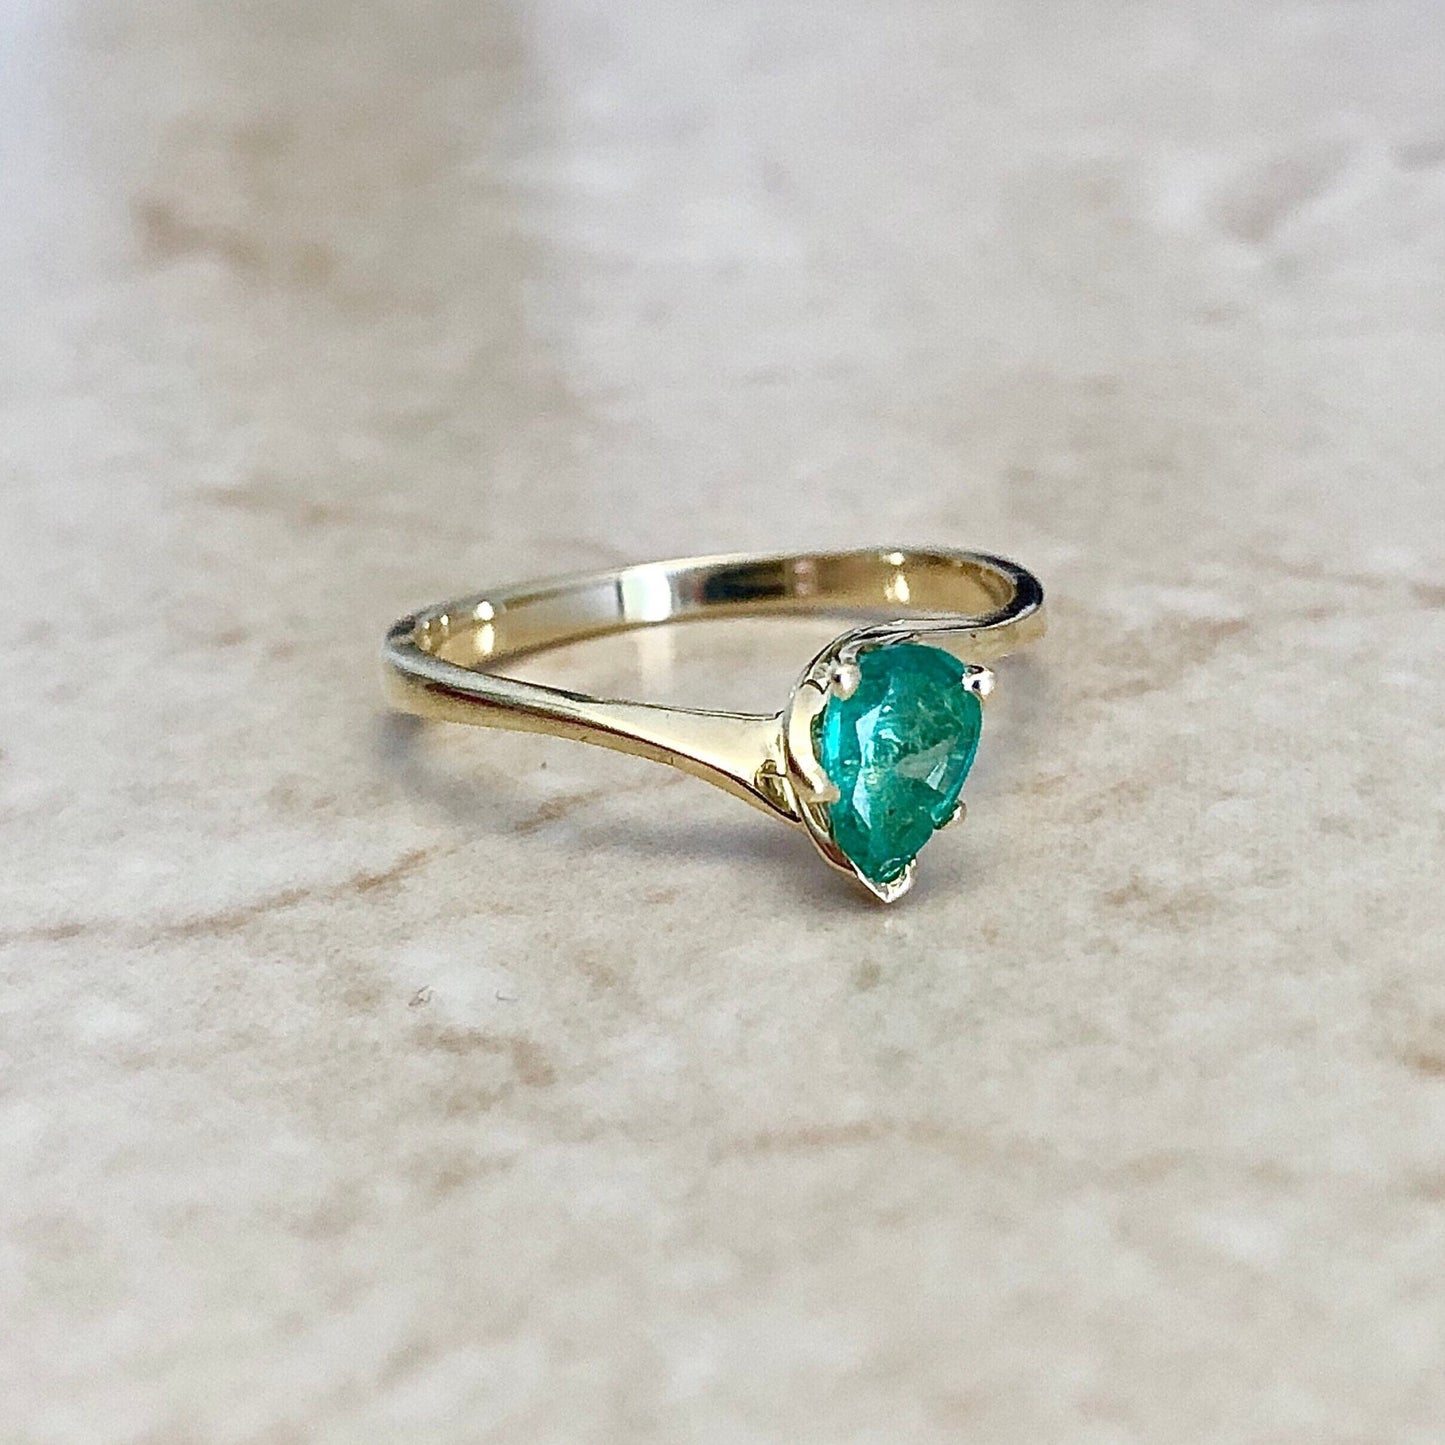 Vintage 14 Karat Yellow Gold Natural Emerald Solitaire Ring - Emerald Cocktail Ring - Engagement Ring - Size 6 US - May Birthstone